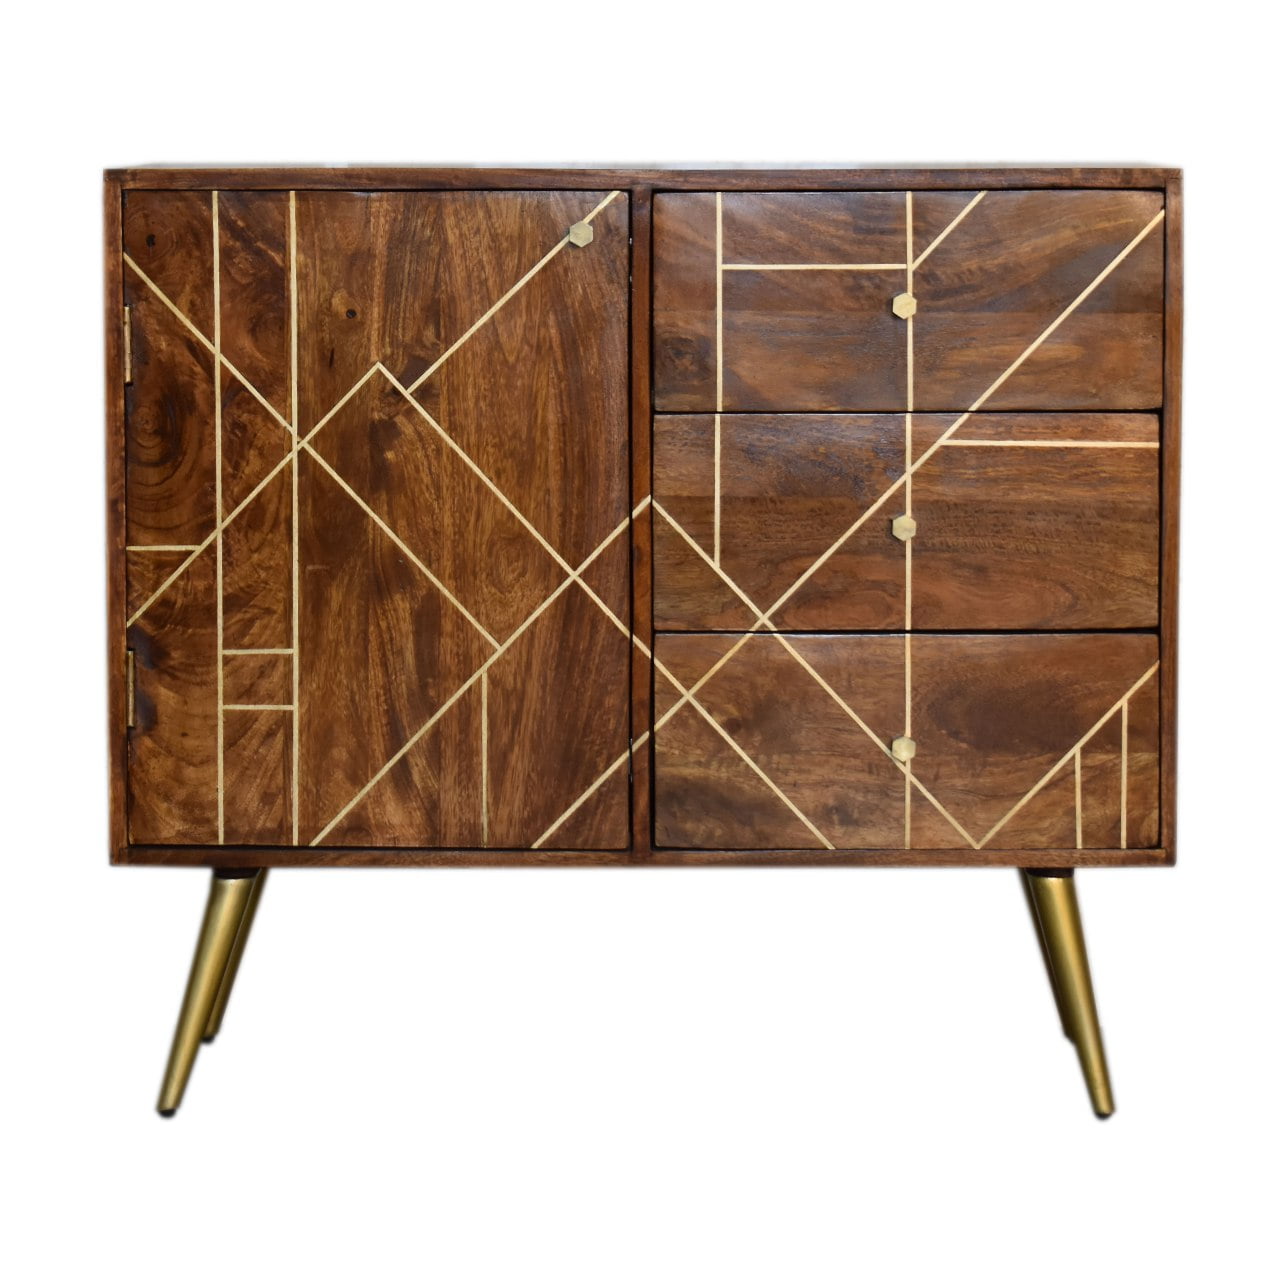 View Chestnut Inlay Abstract Sideboard information